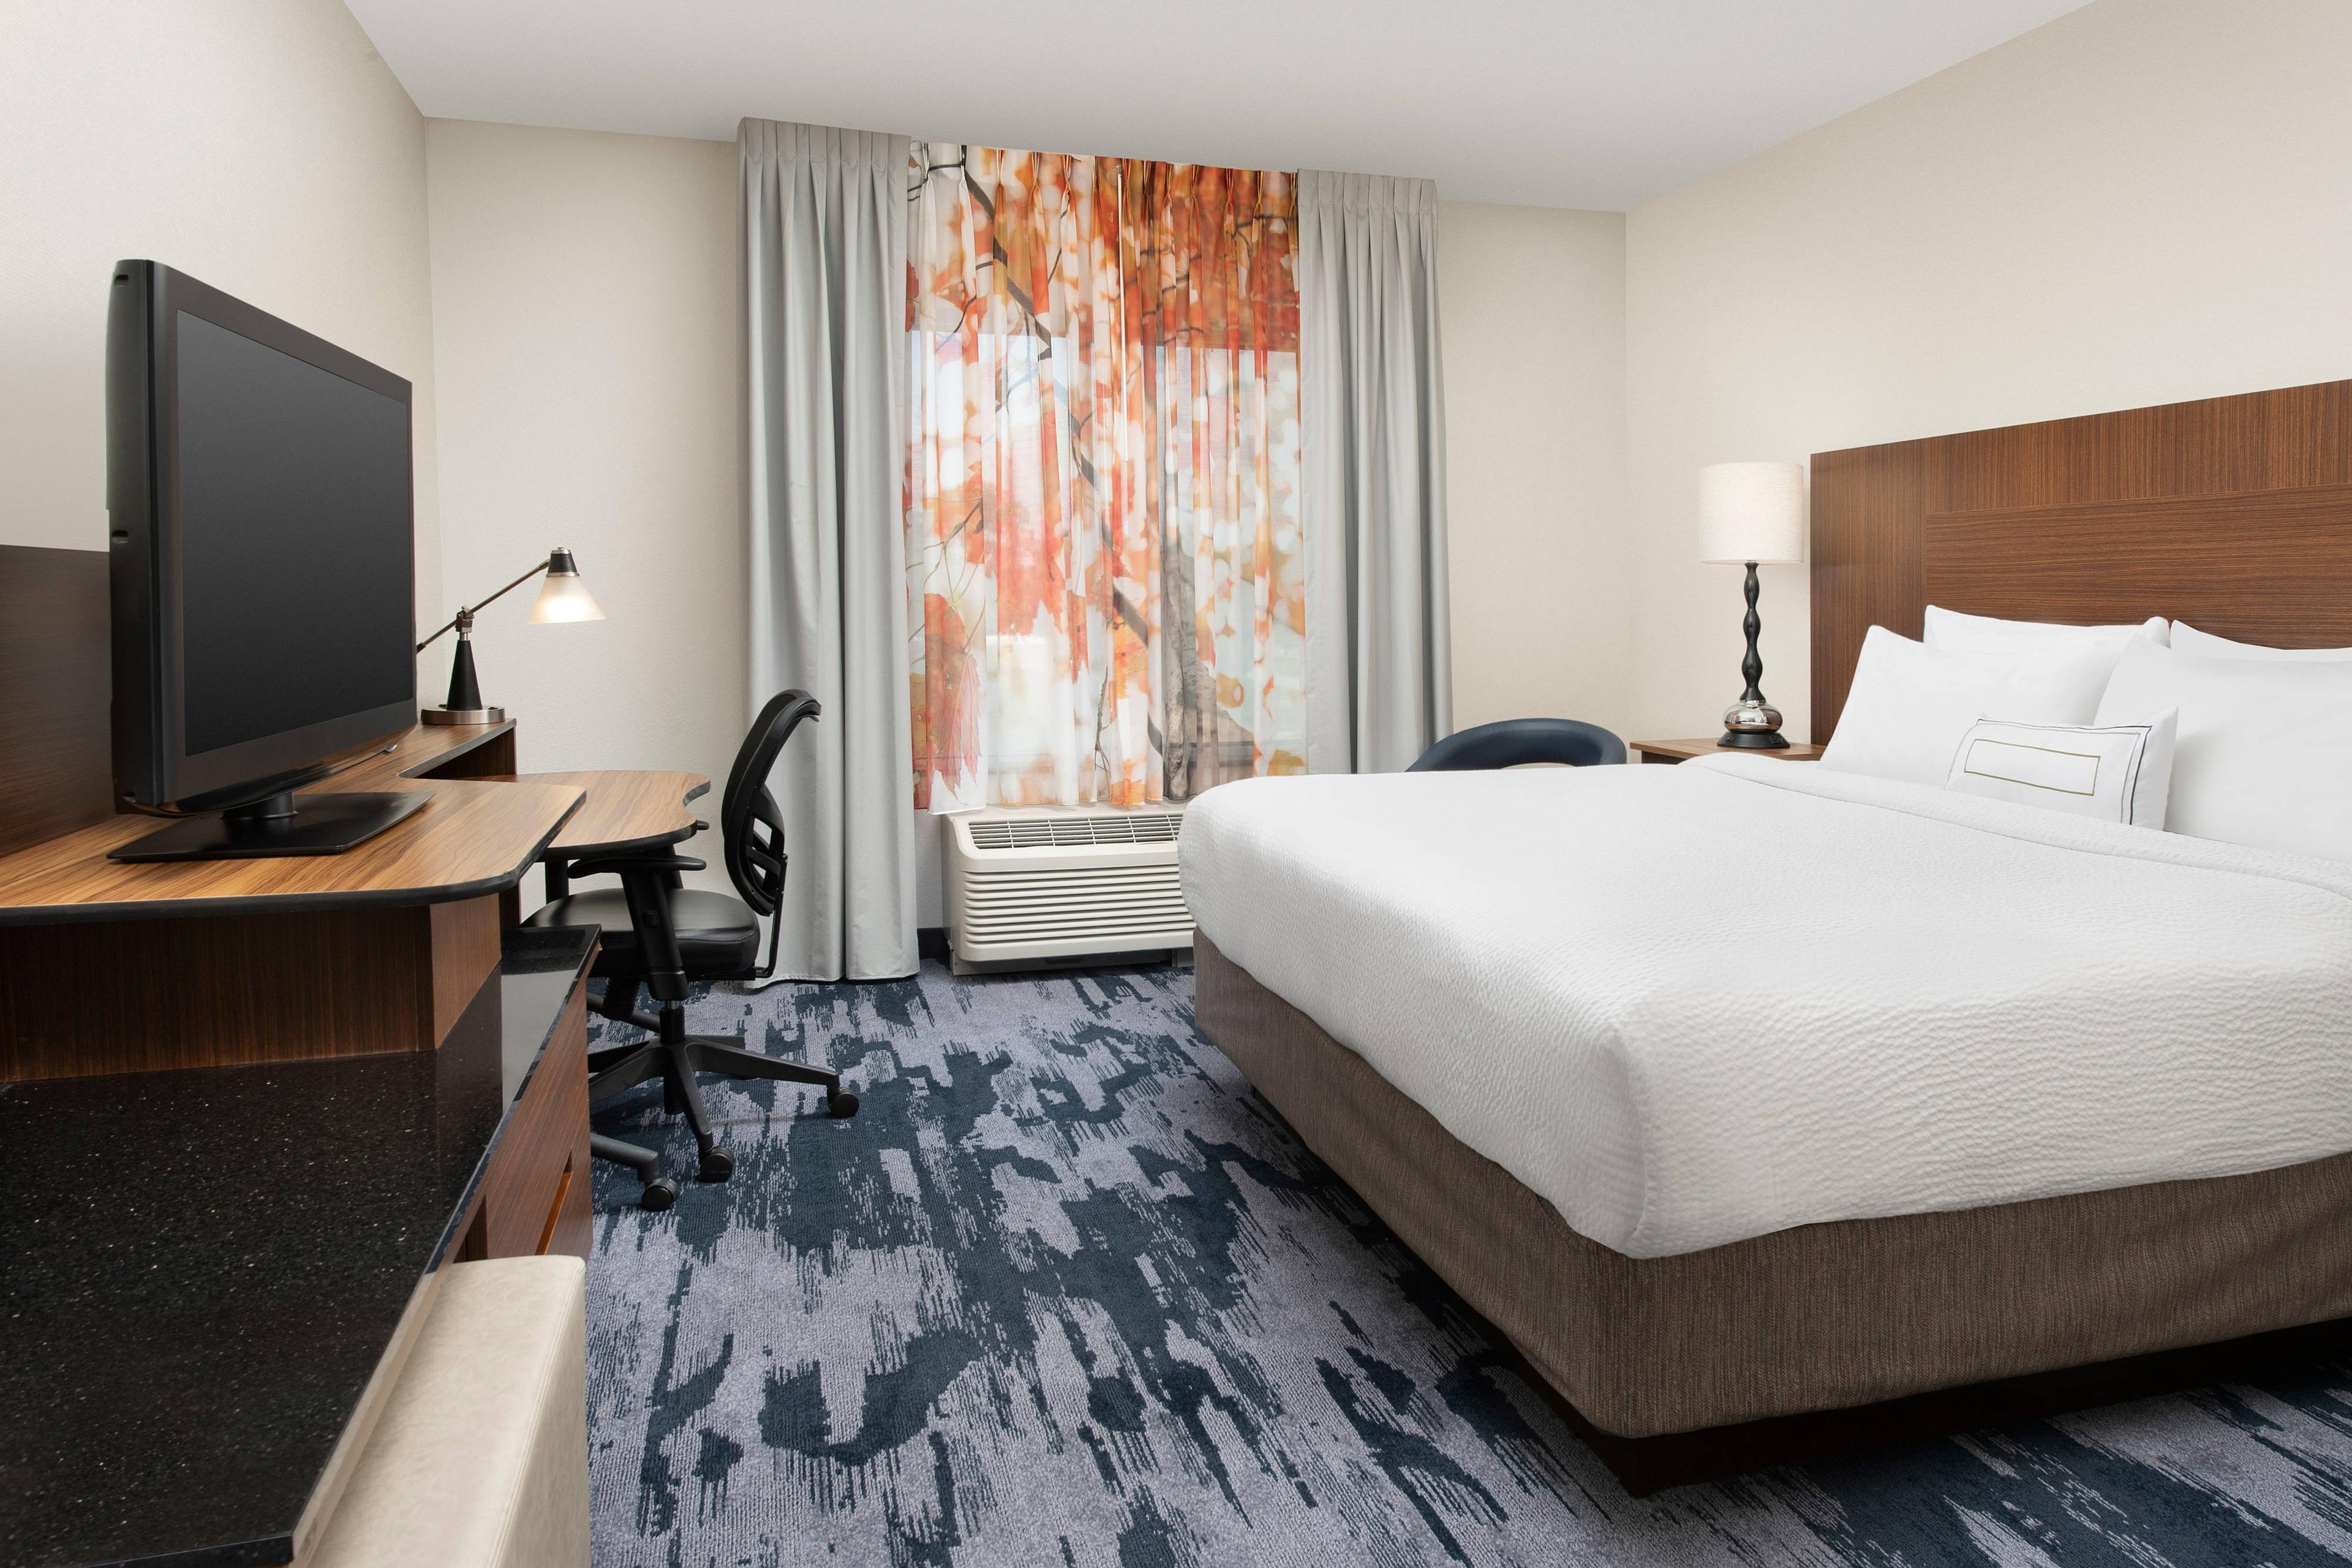 Our king guest rooms offer much more than just a large bed, including a large flat-panel TV, convenient work stations with free high-speed Wi-Fi, and warm natural lighting.